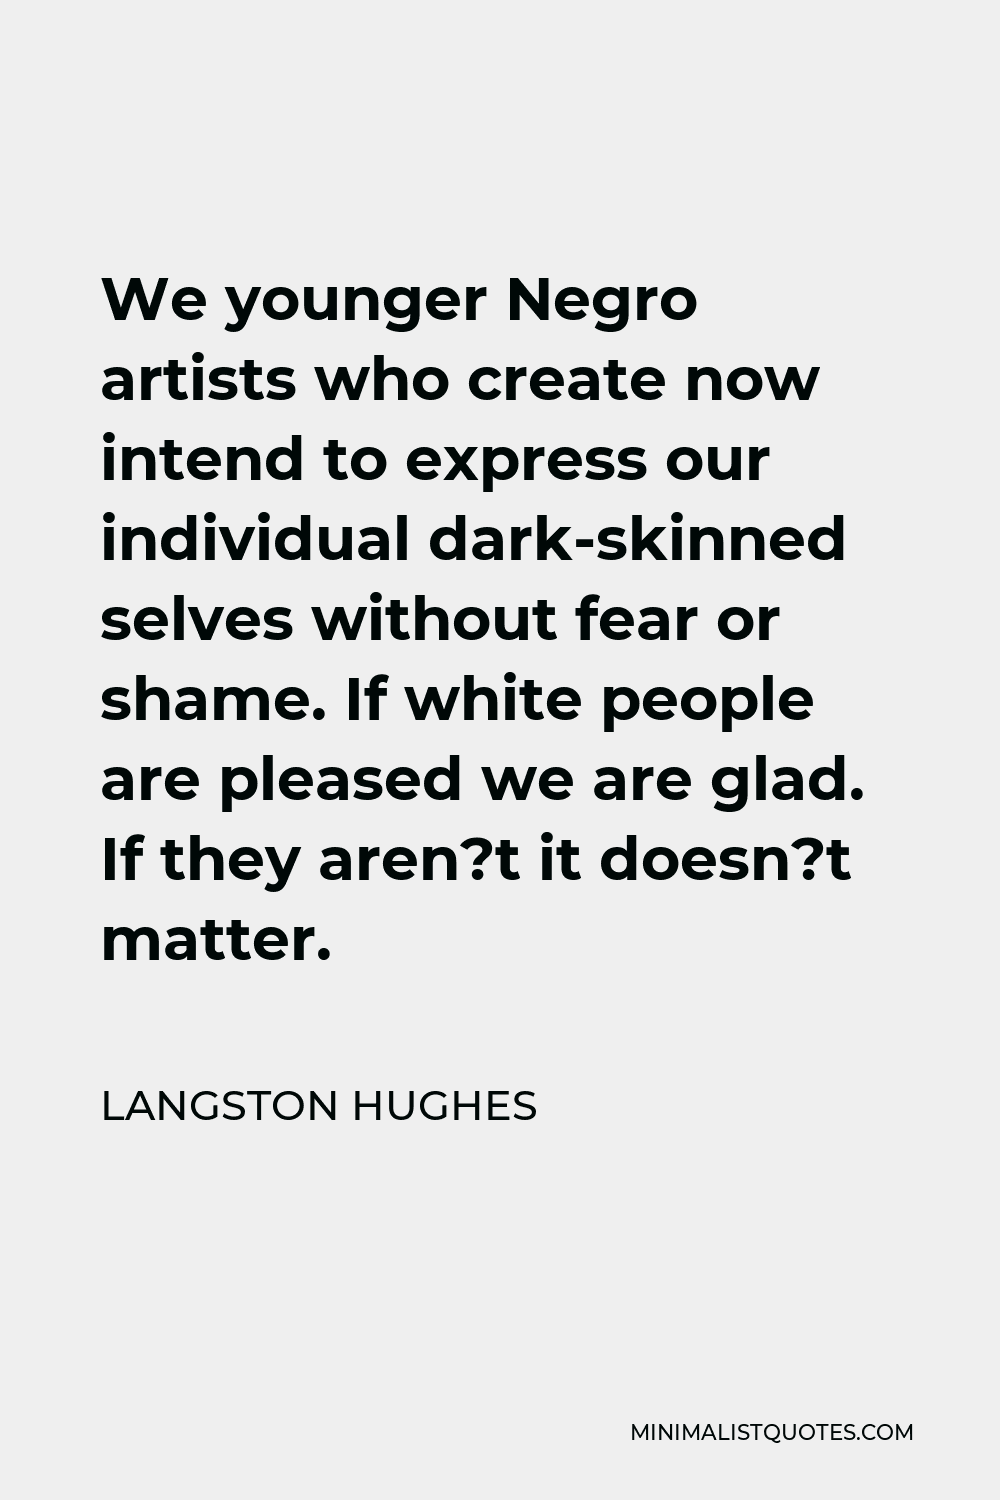 Langston Hughes Quote - We younger Negro artists who create now intend to express our individual dark-skinned selves without fear or shame. If white people are pleased we are glad. If they aren?t it doesn?t matter.